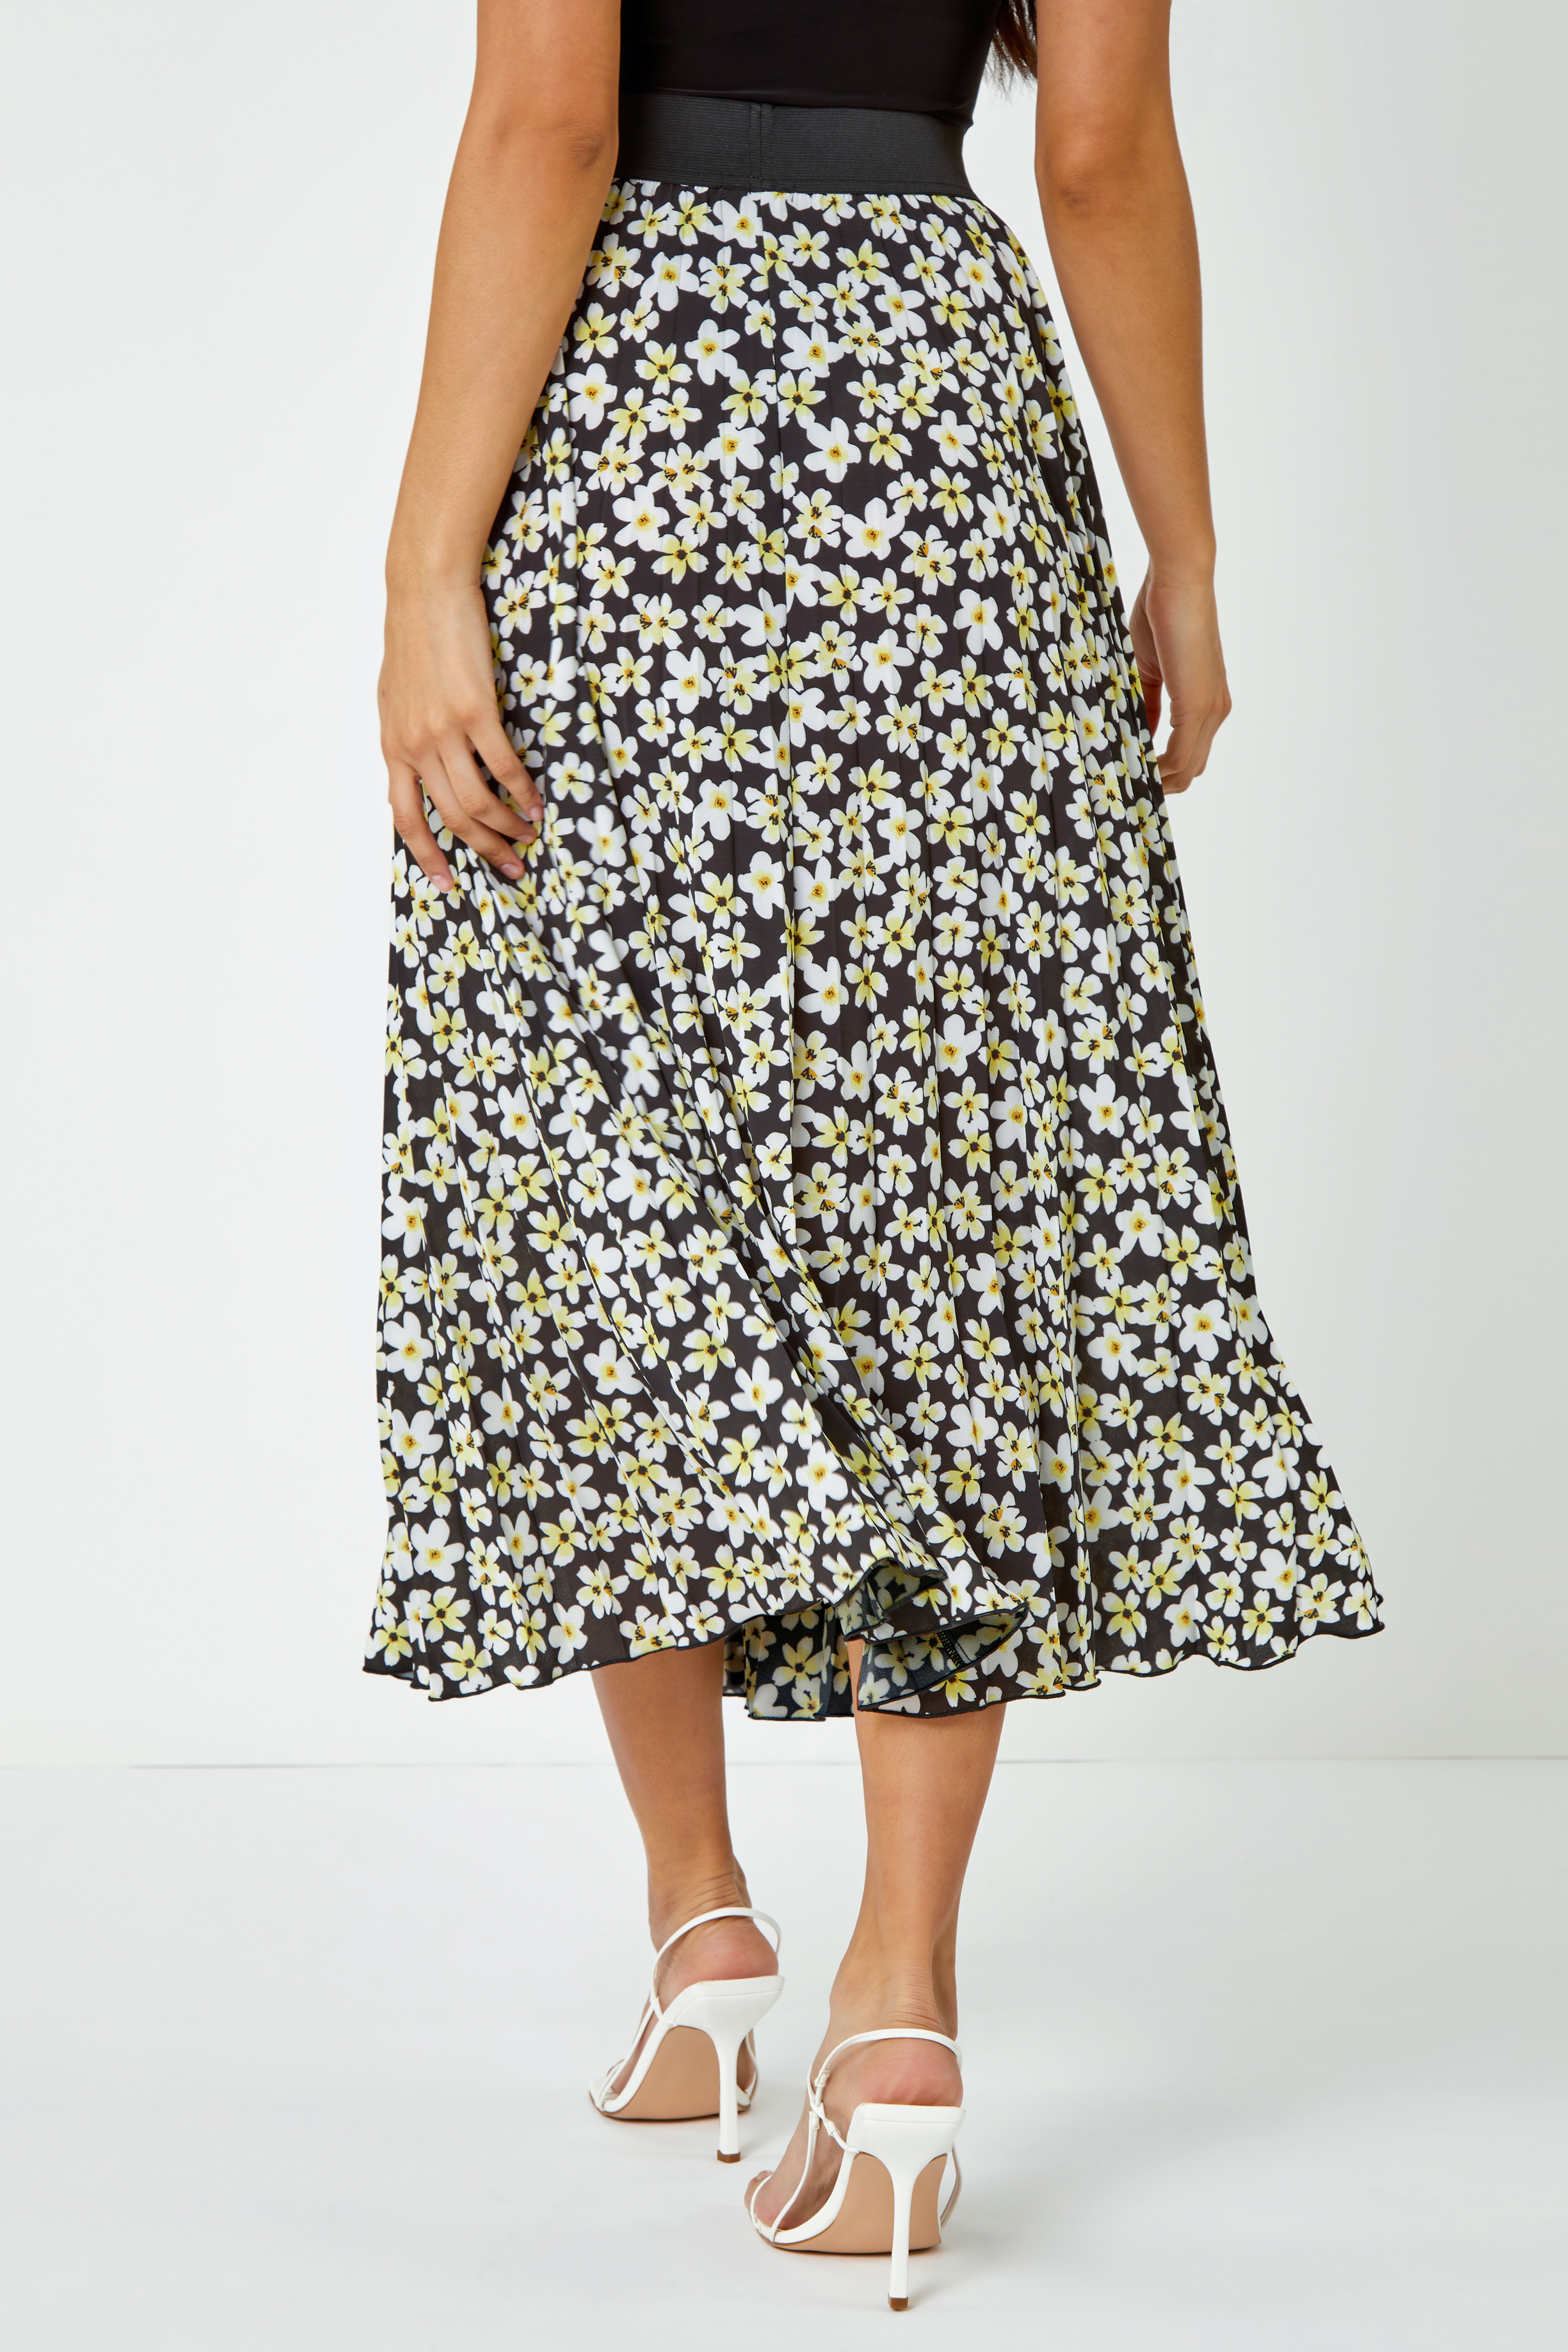 Black Daisy Floral Print Pleated Skirt, Image 3 of 5